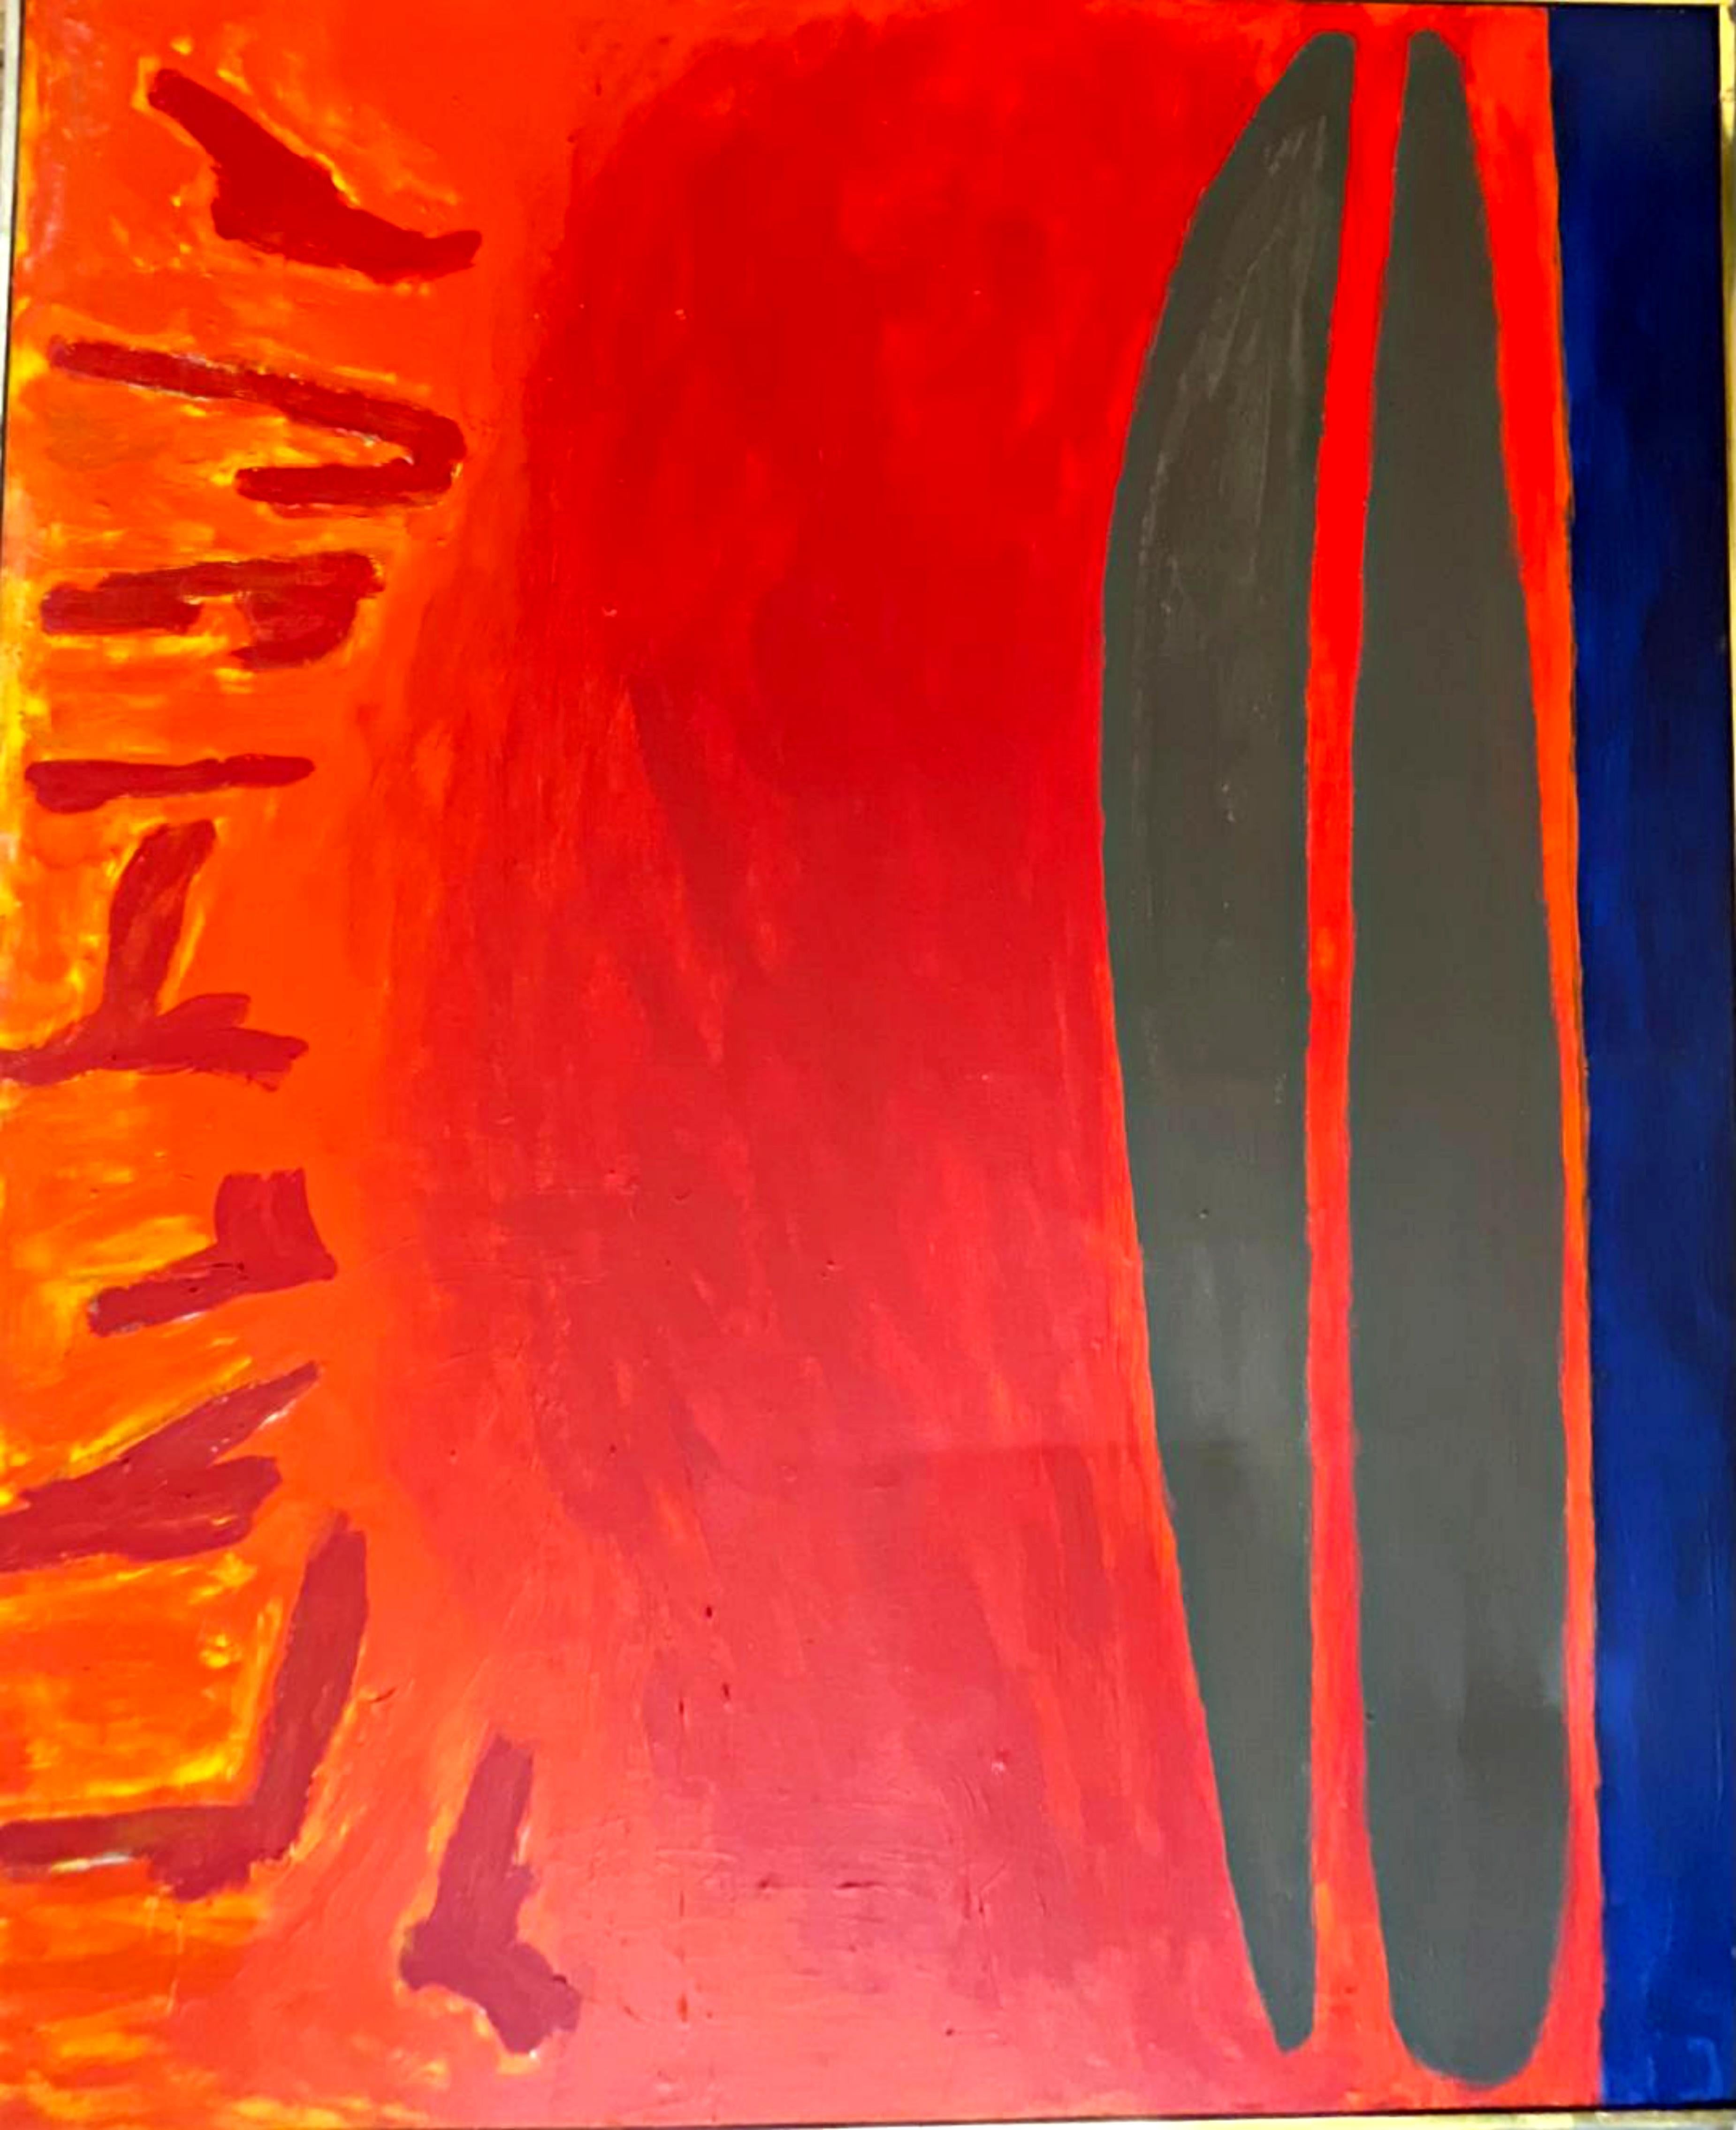 Sunrise - an Expression (with original Washburn gallery label) - Painting by Alan Cote